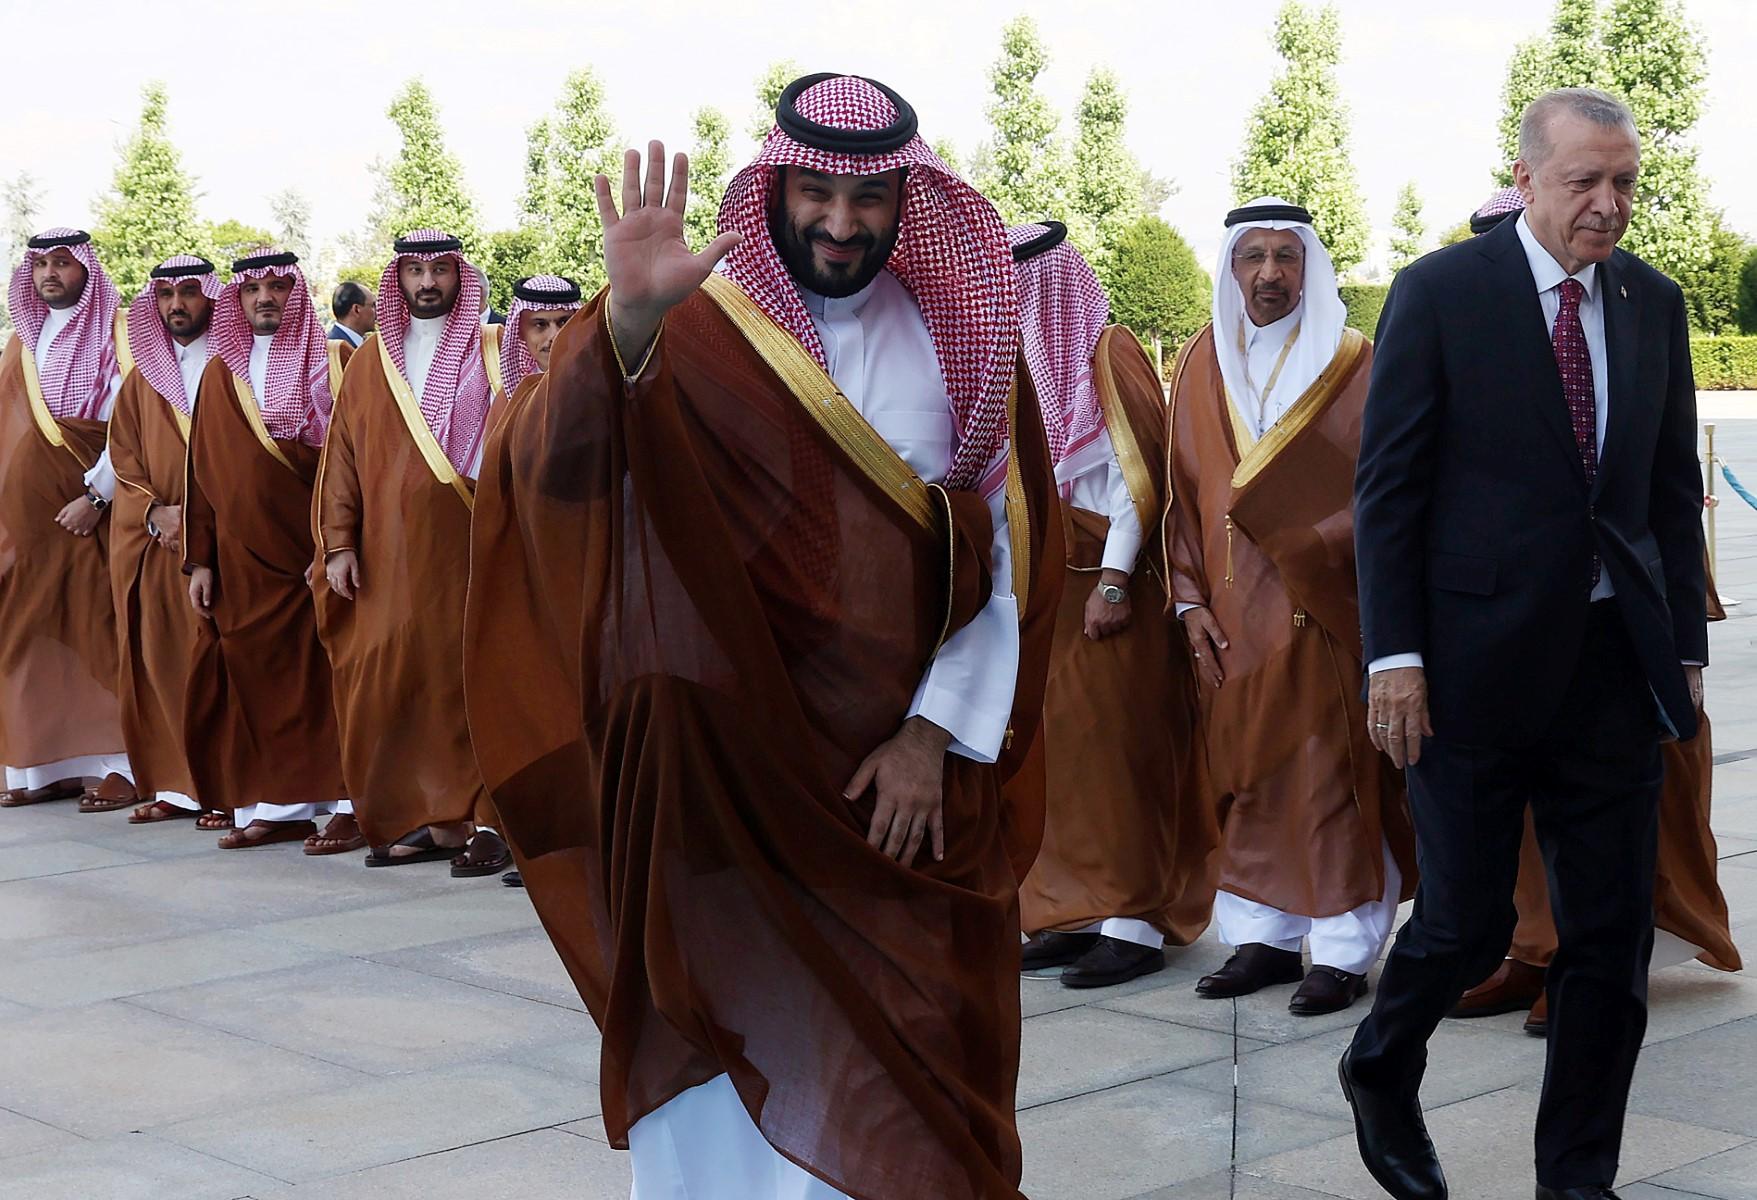 Crown Prince of Saudi Arabia Mohammed bin Salman waves as he is welcomed by Turkey's President Recep Tayyip Erdogan (right) during an official ceremony at the Presidential Complex in Ankara, on June 22. Photo: AFP